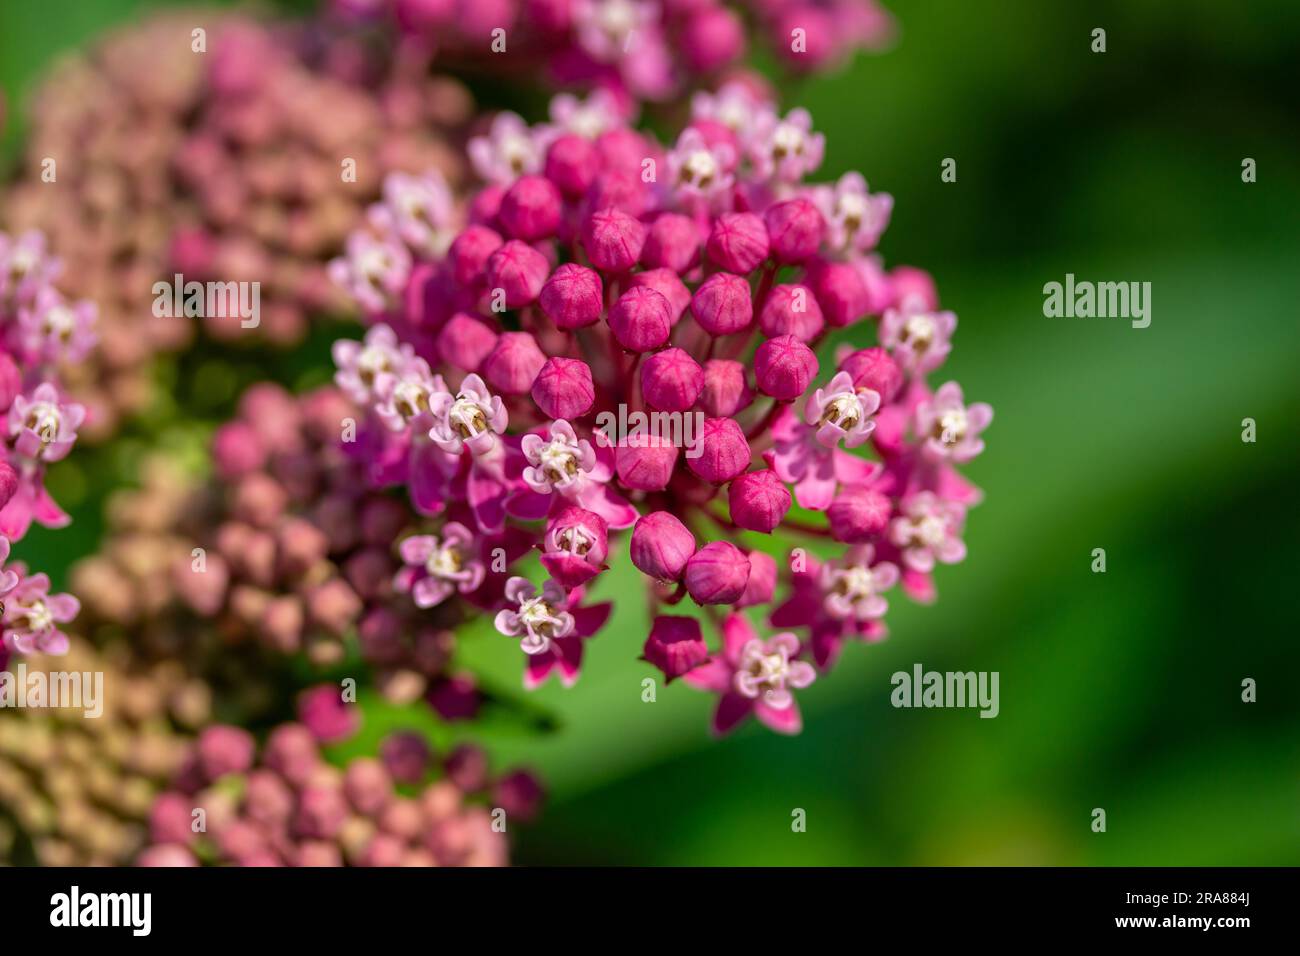 Macro texture background of showy pink swamp milkweed (Asclepias incarnata) flowers in various stages of buds and blooms. Stock Photo